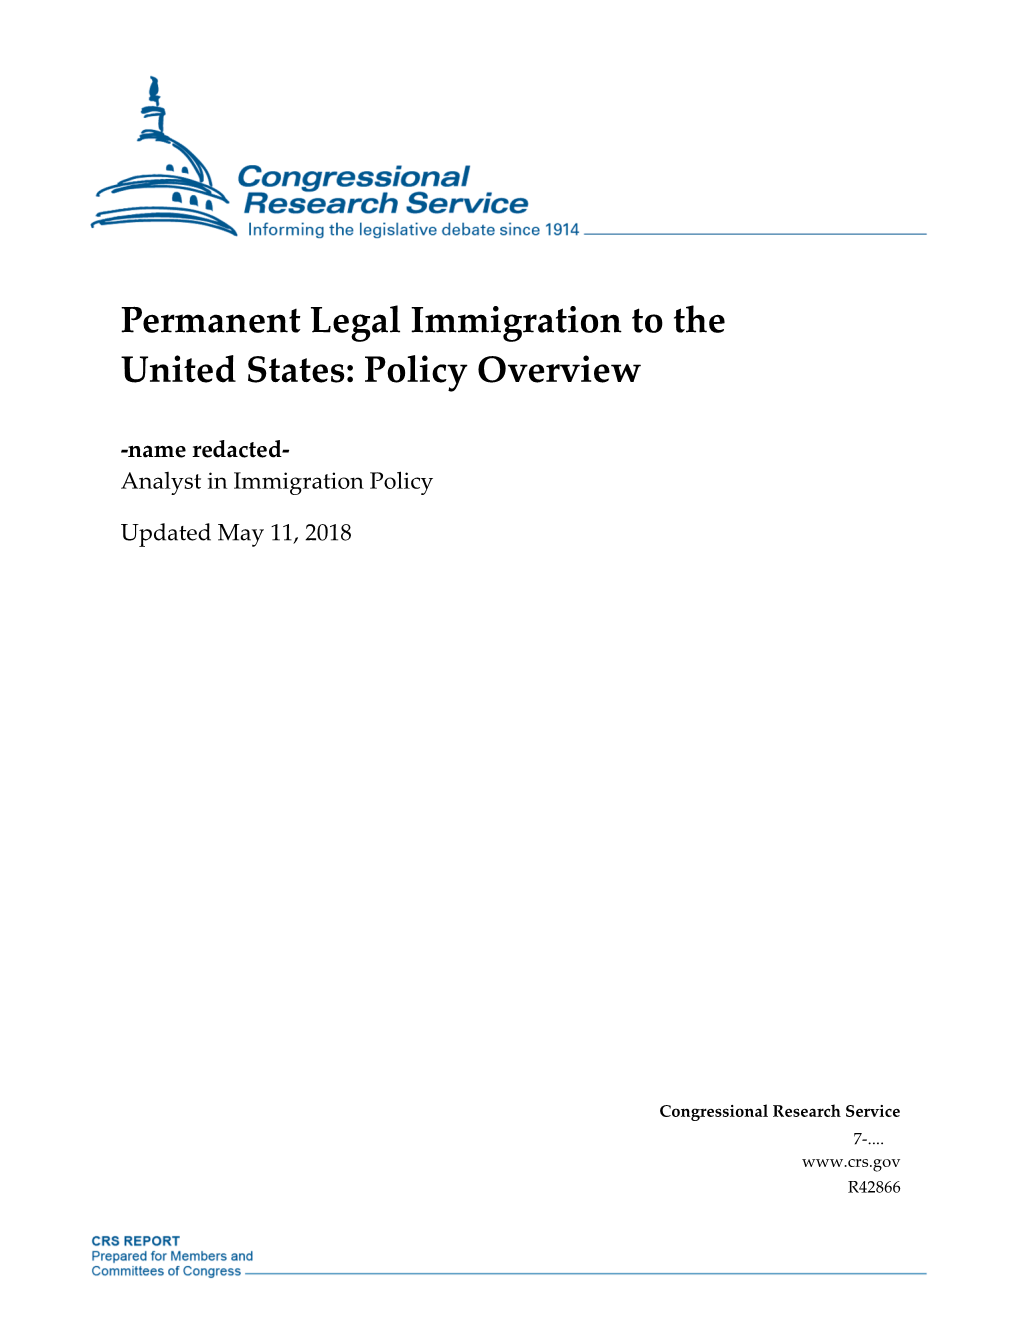 Permanent Legal Immigration to the United States: Policy Overview